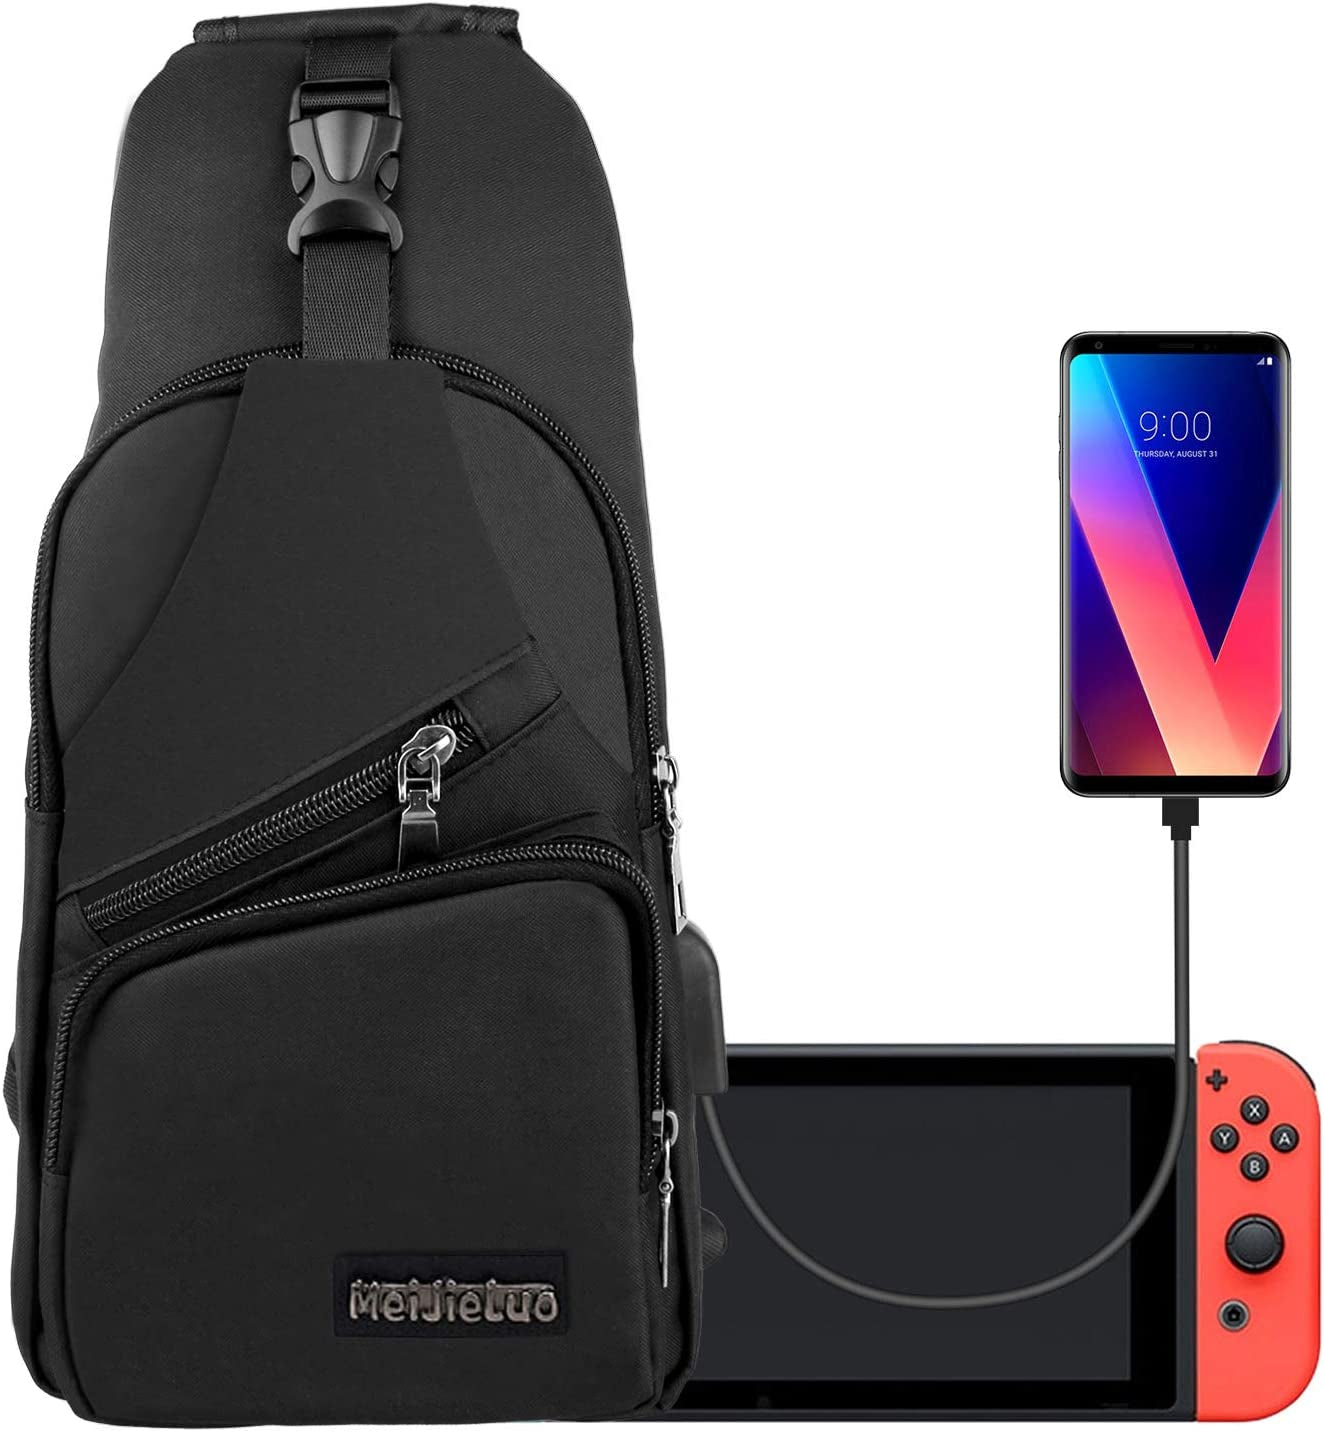 Crossbody Sling Backpack Sling Bag, Eeekit Backpack Crossbody Travel Bag for Men and Women, Console Joy-Cons and Accessories, Charge Your Phone via the Side USB Charging Interface (Grey)